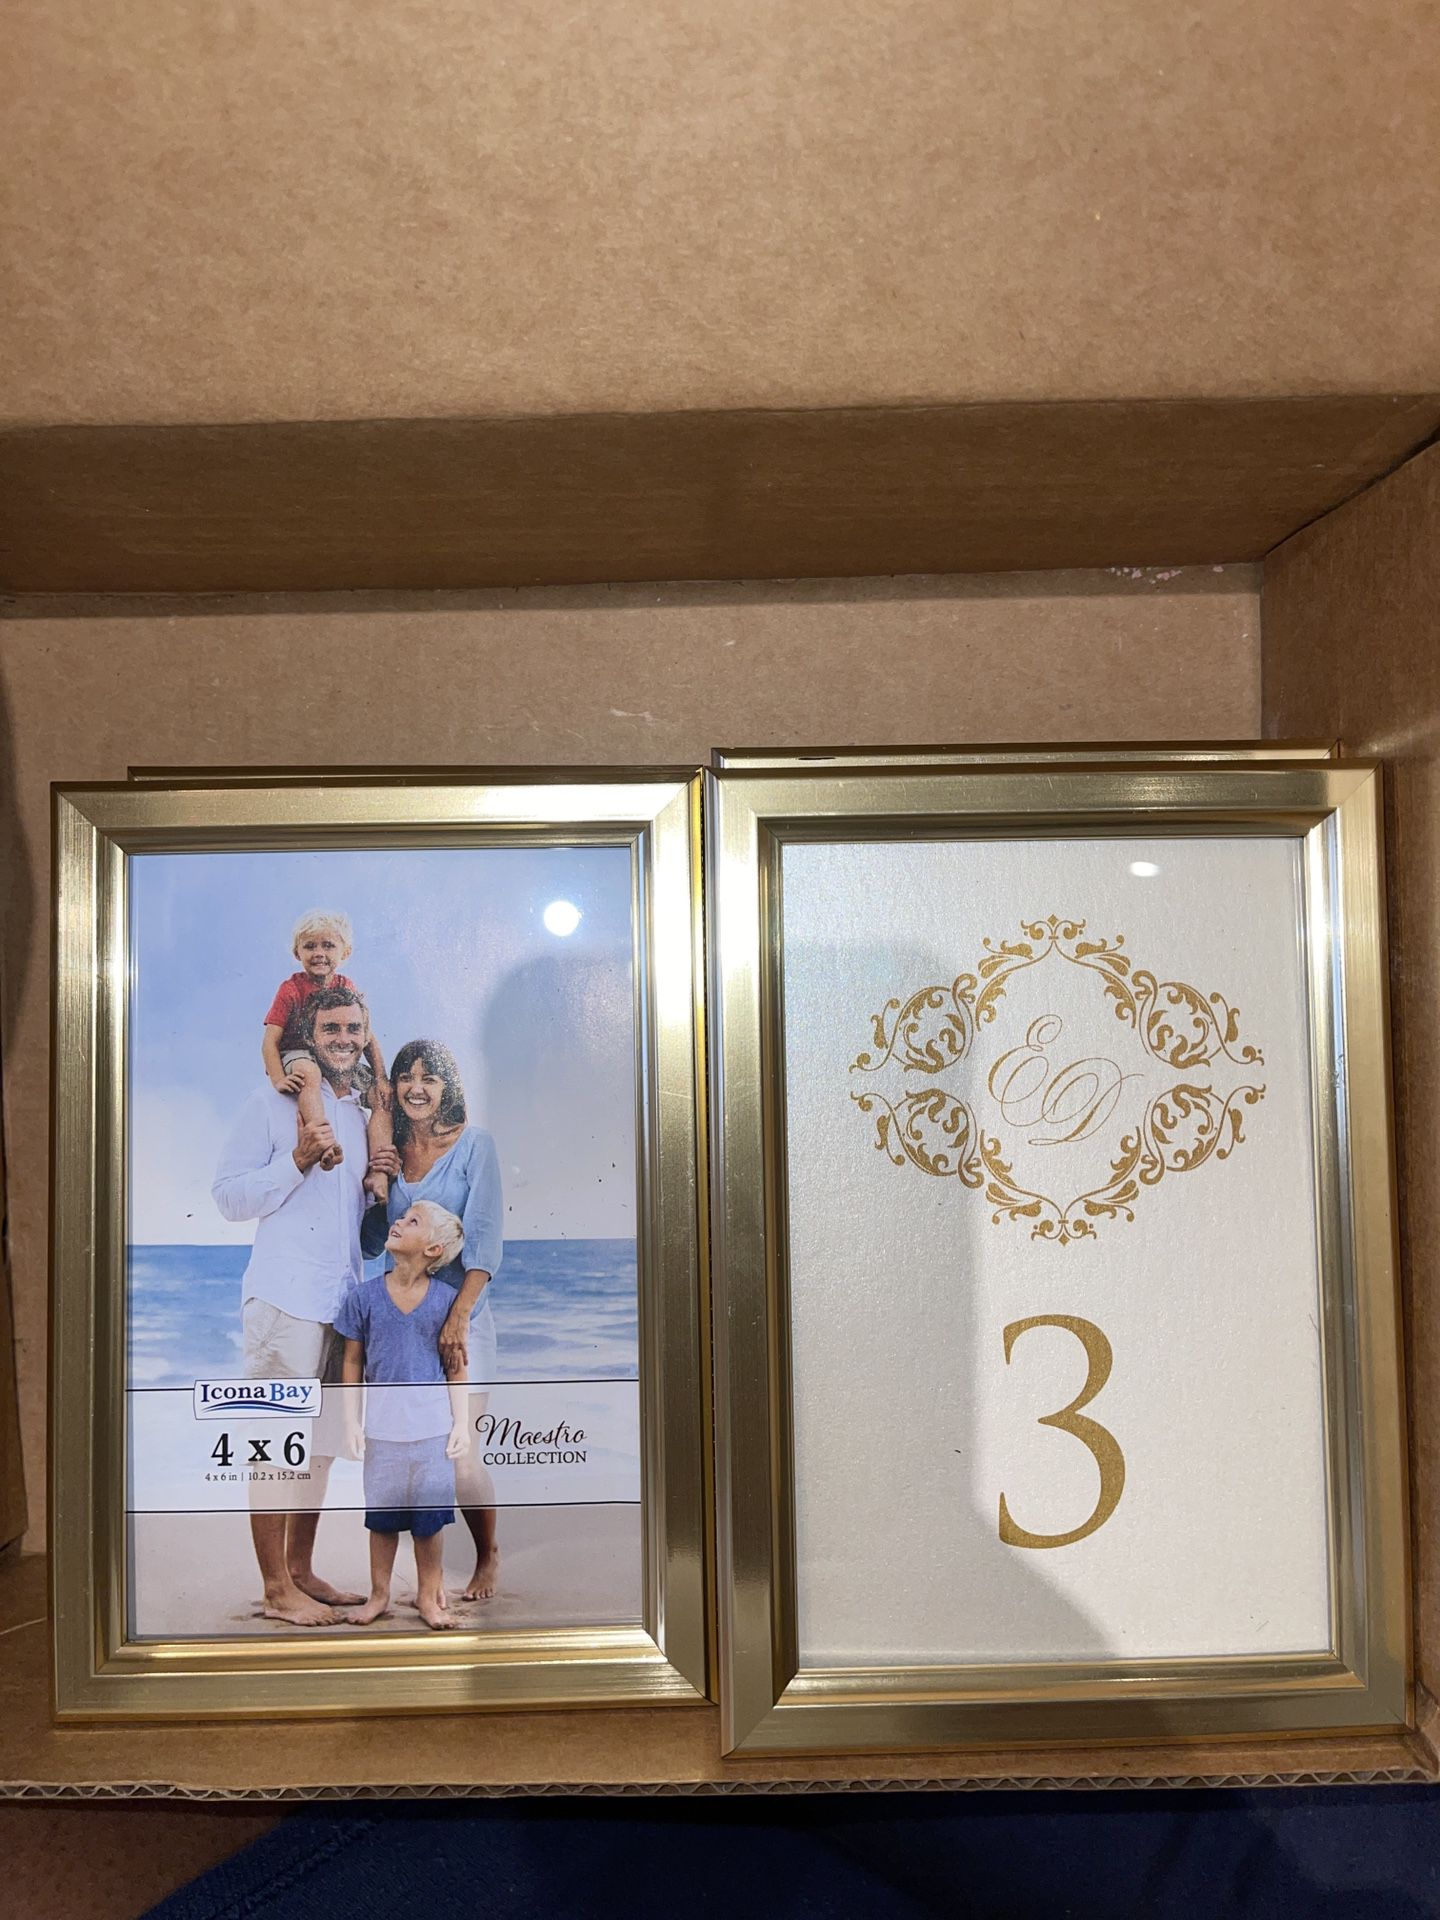 Icona Bay 4x6 Picture Frames Set (Gold, 12 Pack), Classy Contemporary Style, Maestro Collection